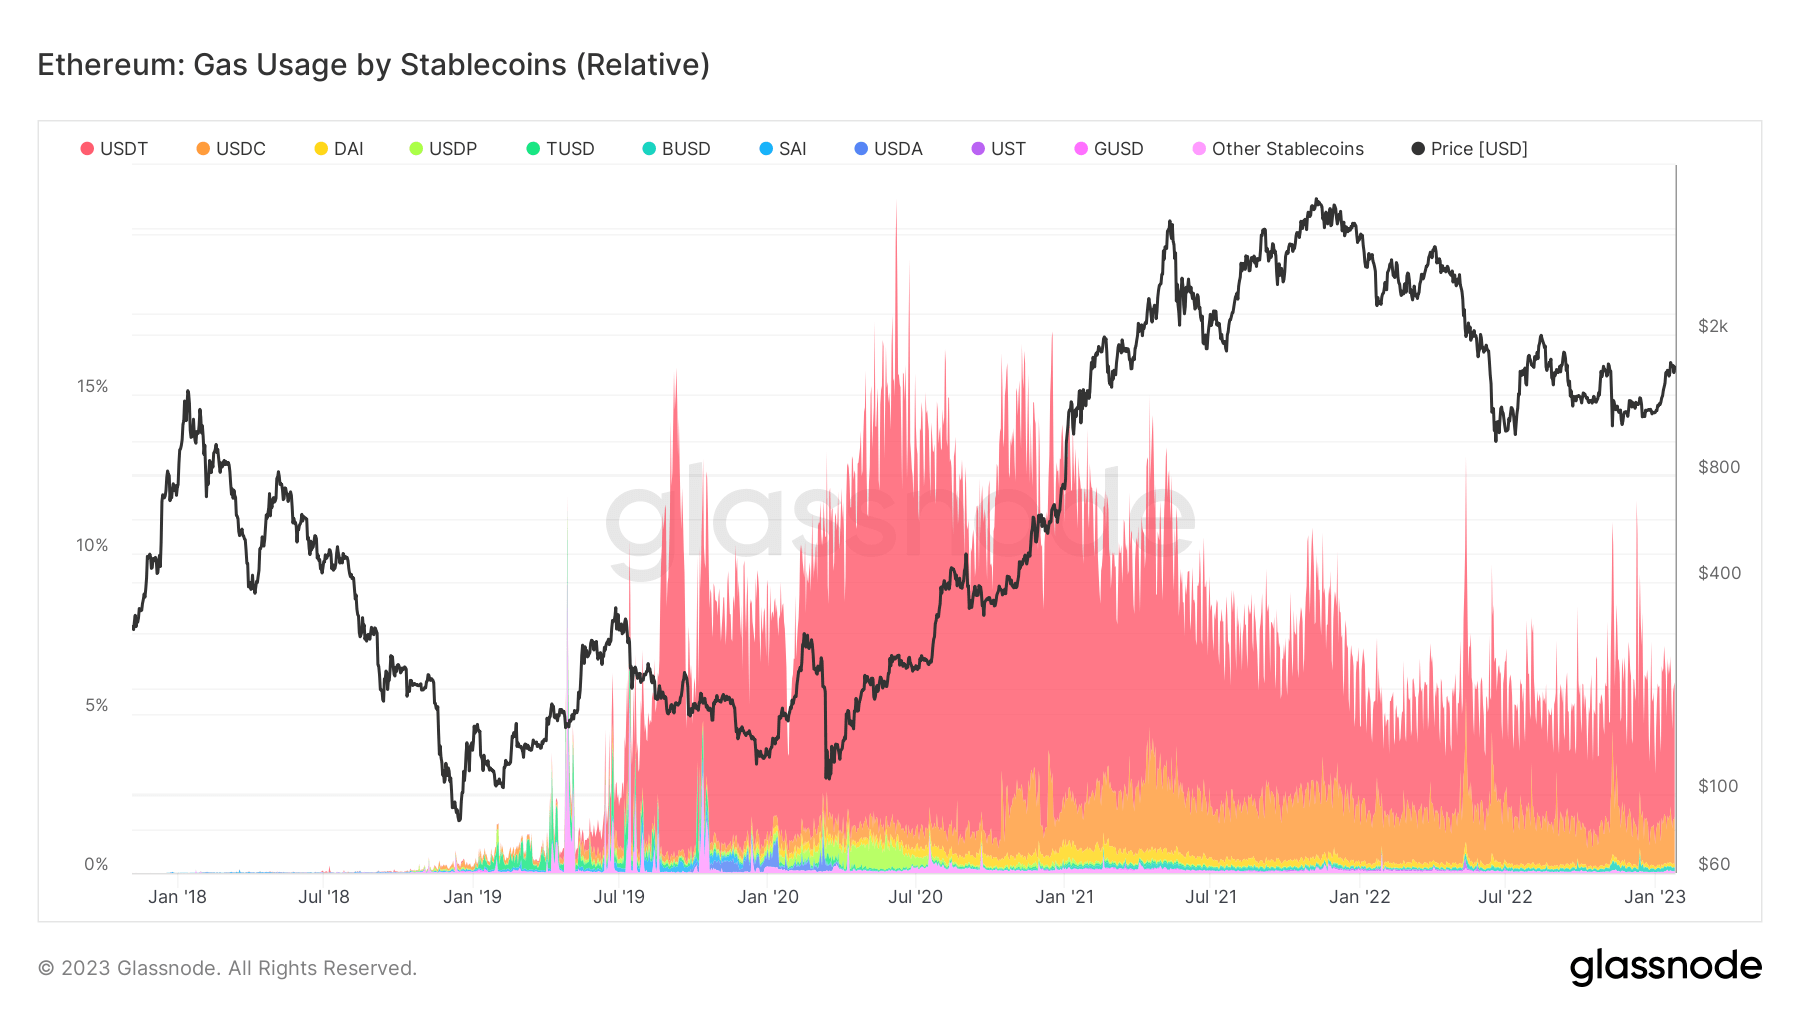 ETH gas usage by stablecoins